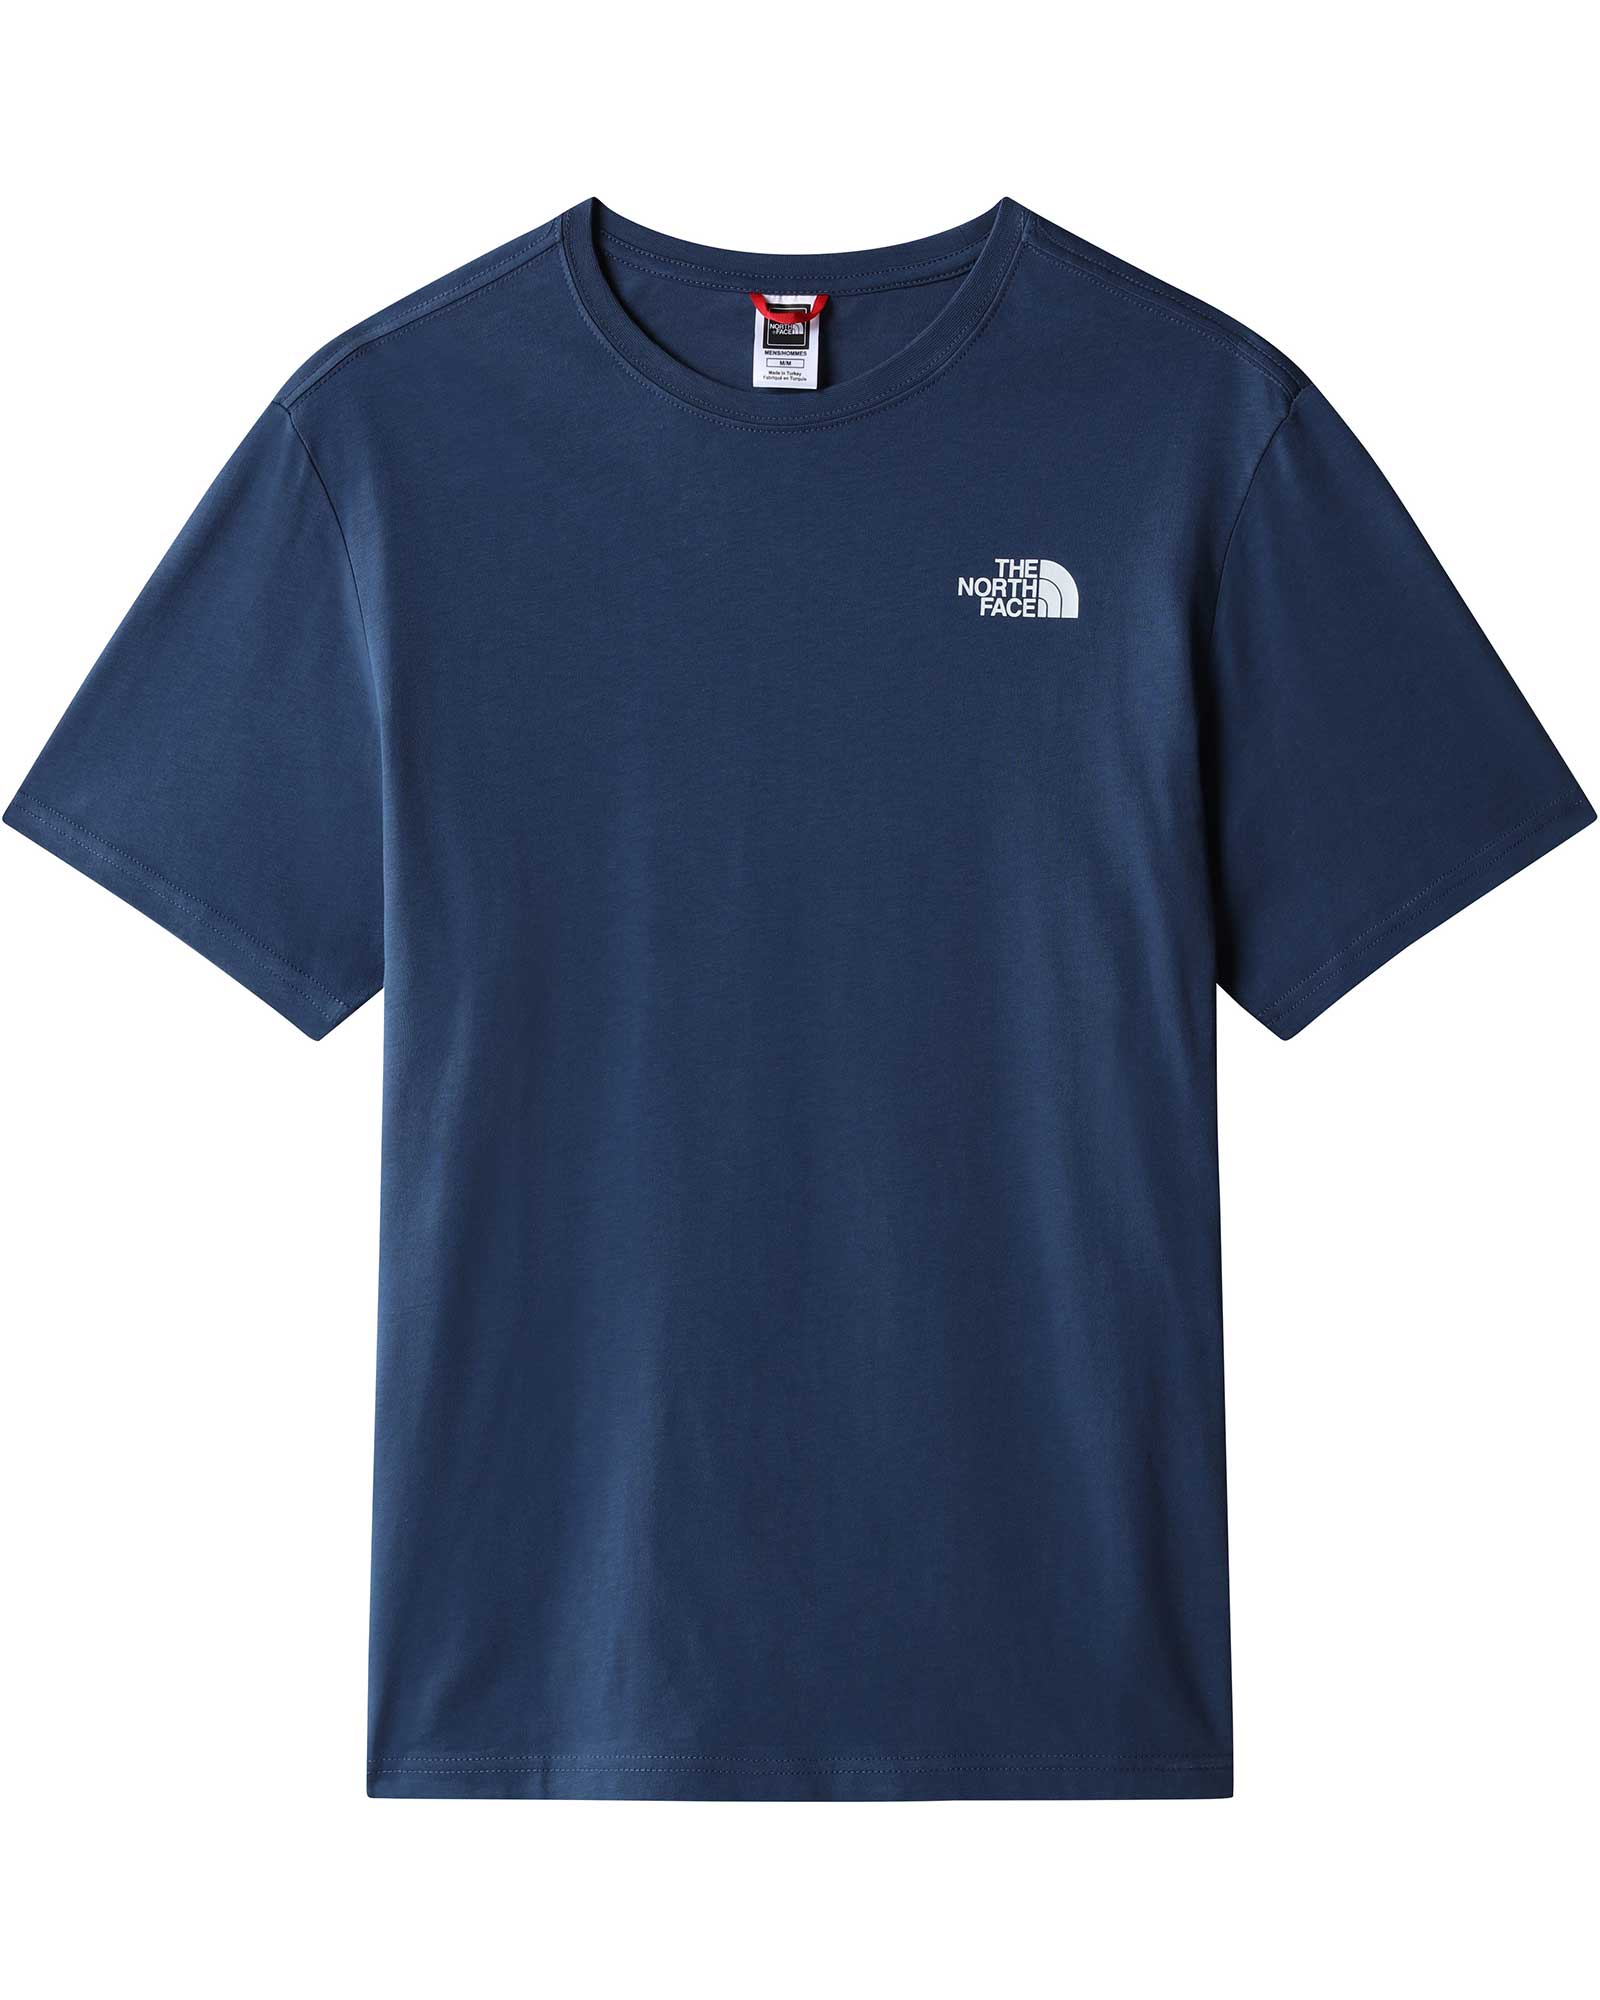 Product image of The North Face Red Box Men's T-Shirt